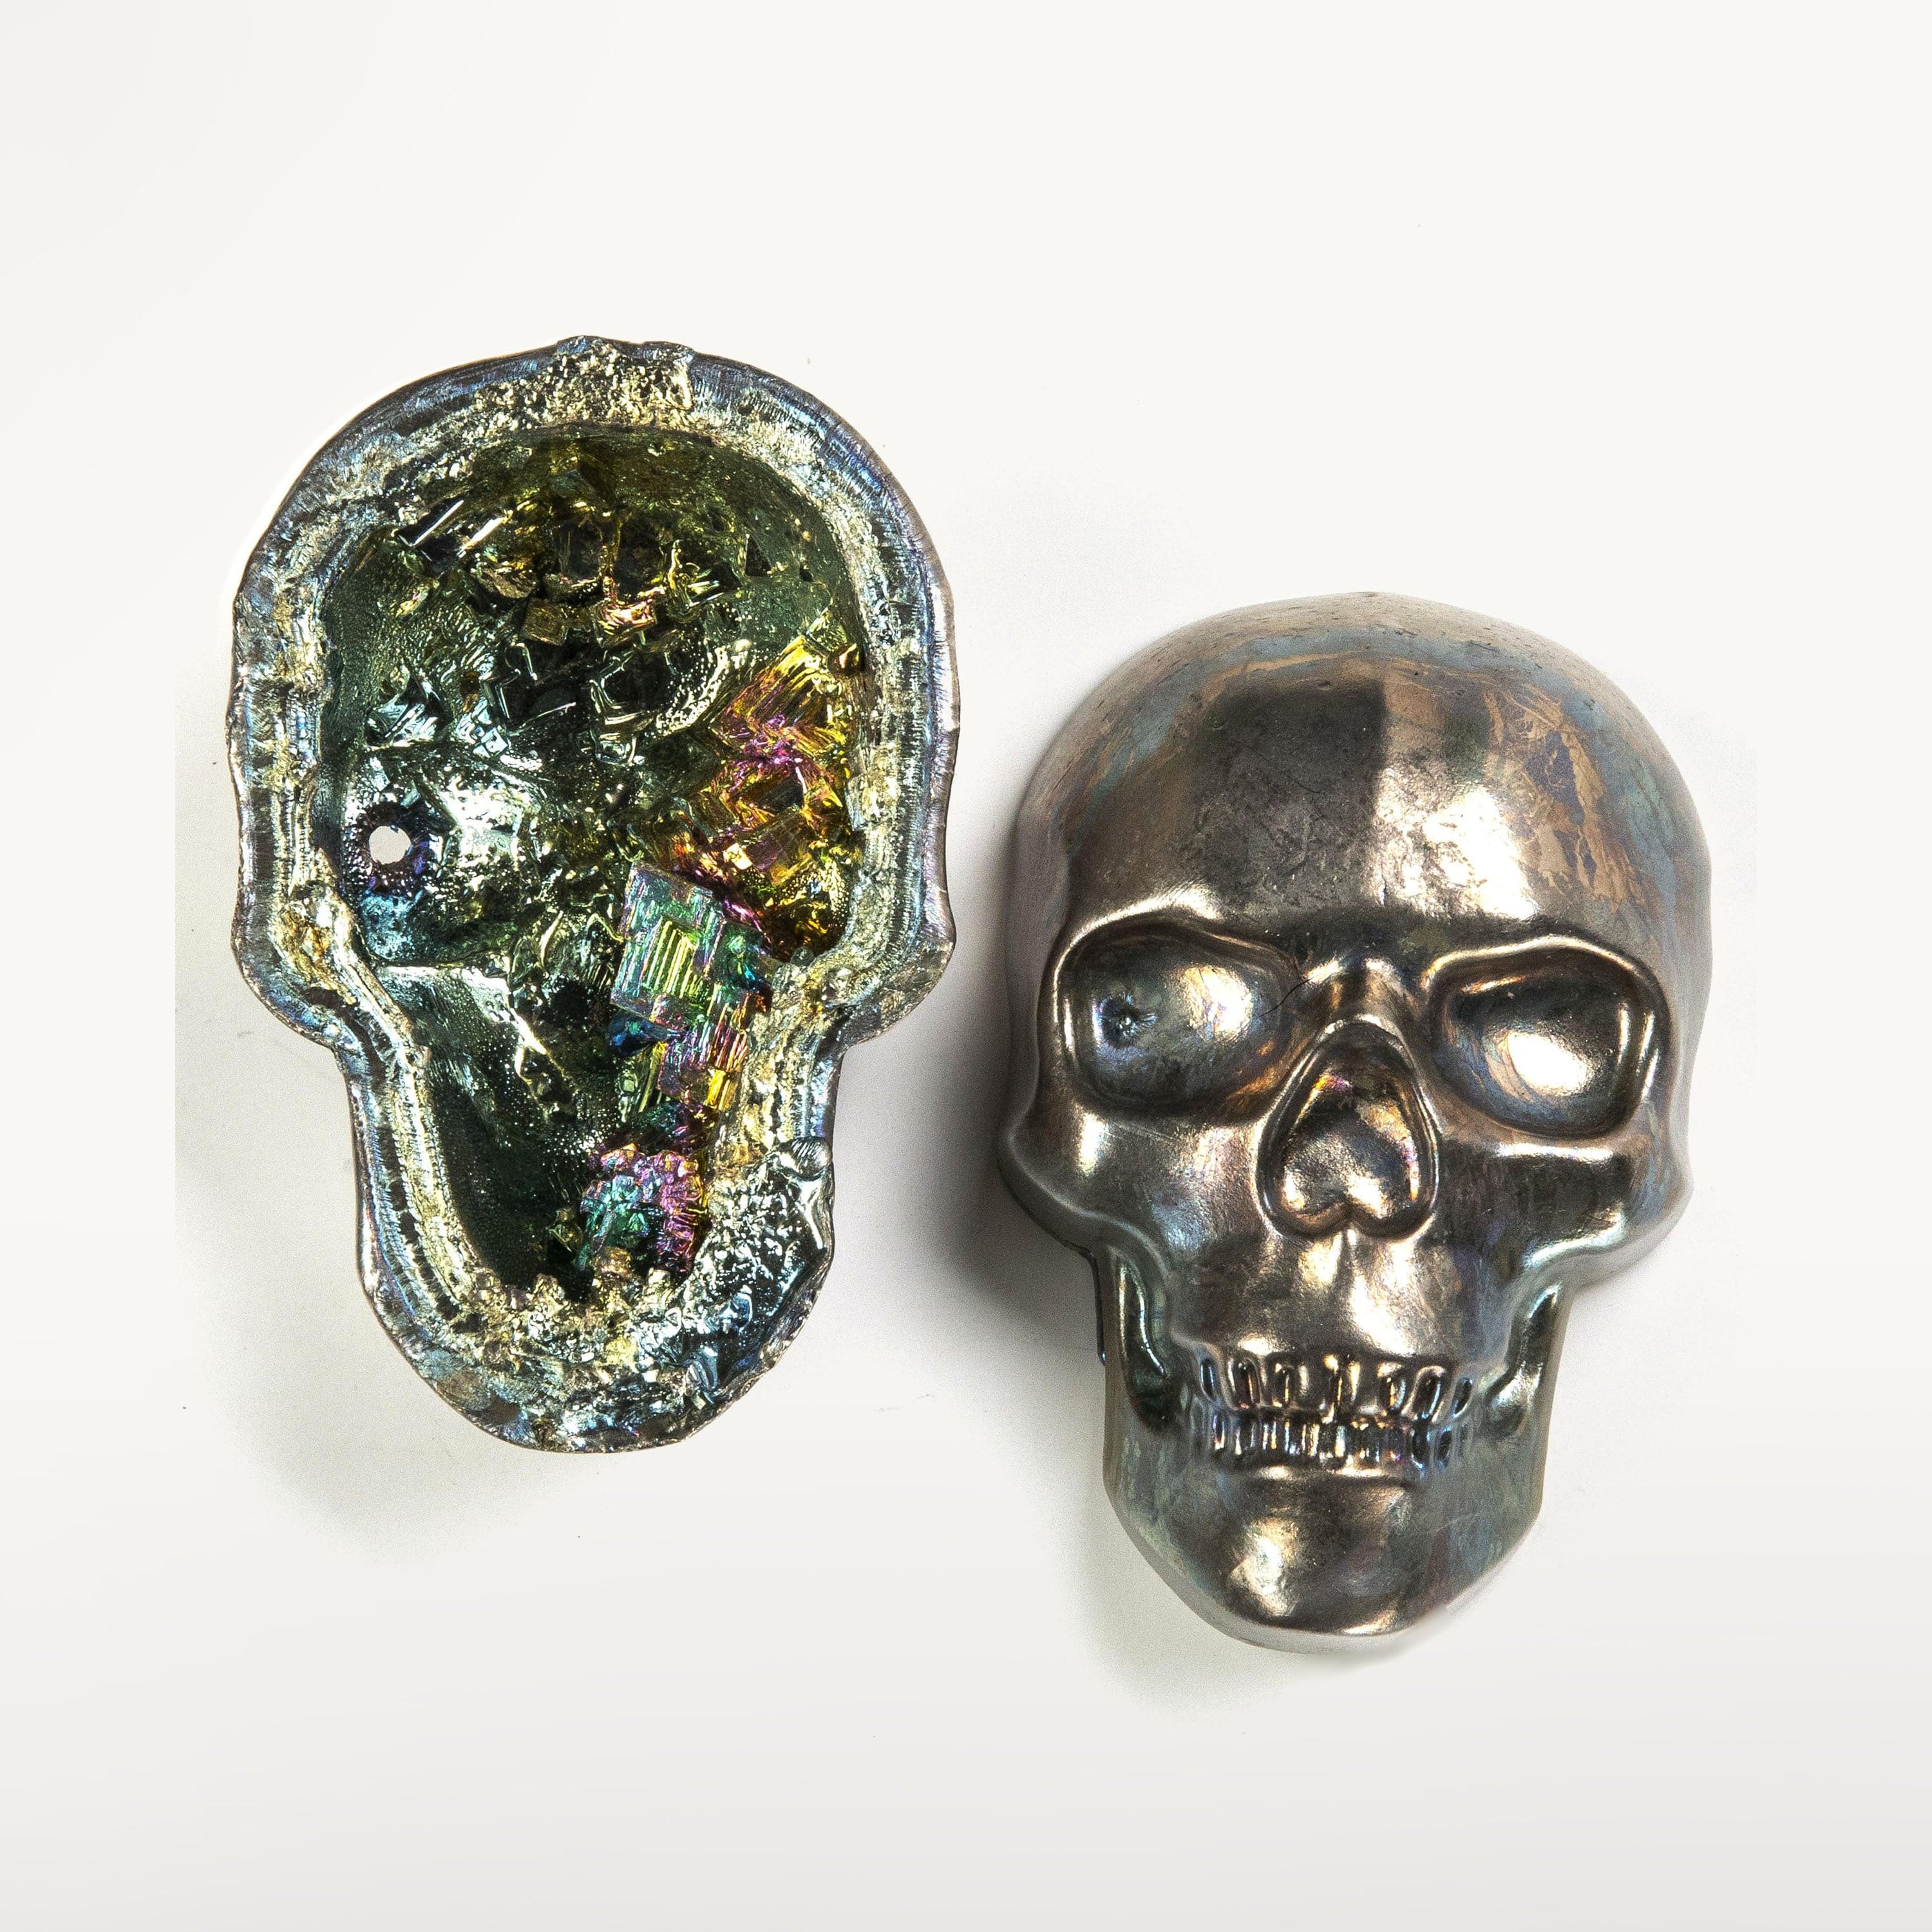 Kalifano Skull Carvings Raw Bismuth Skull BS1600